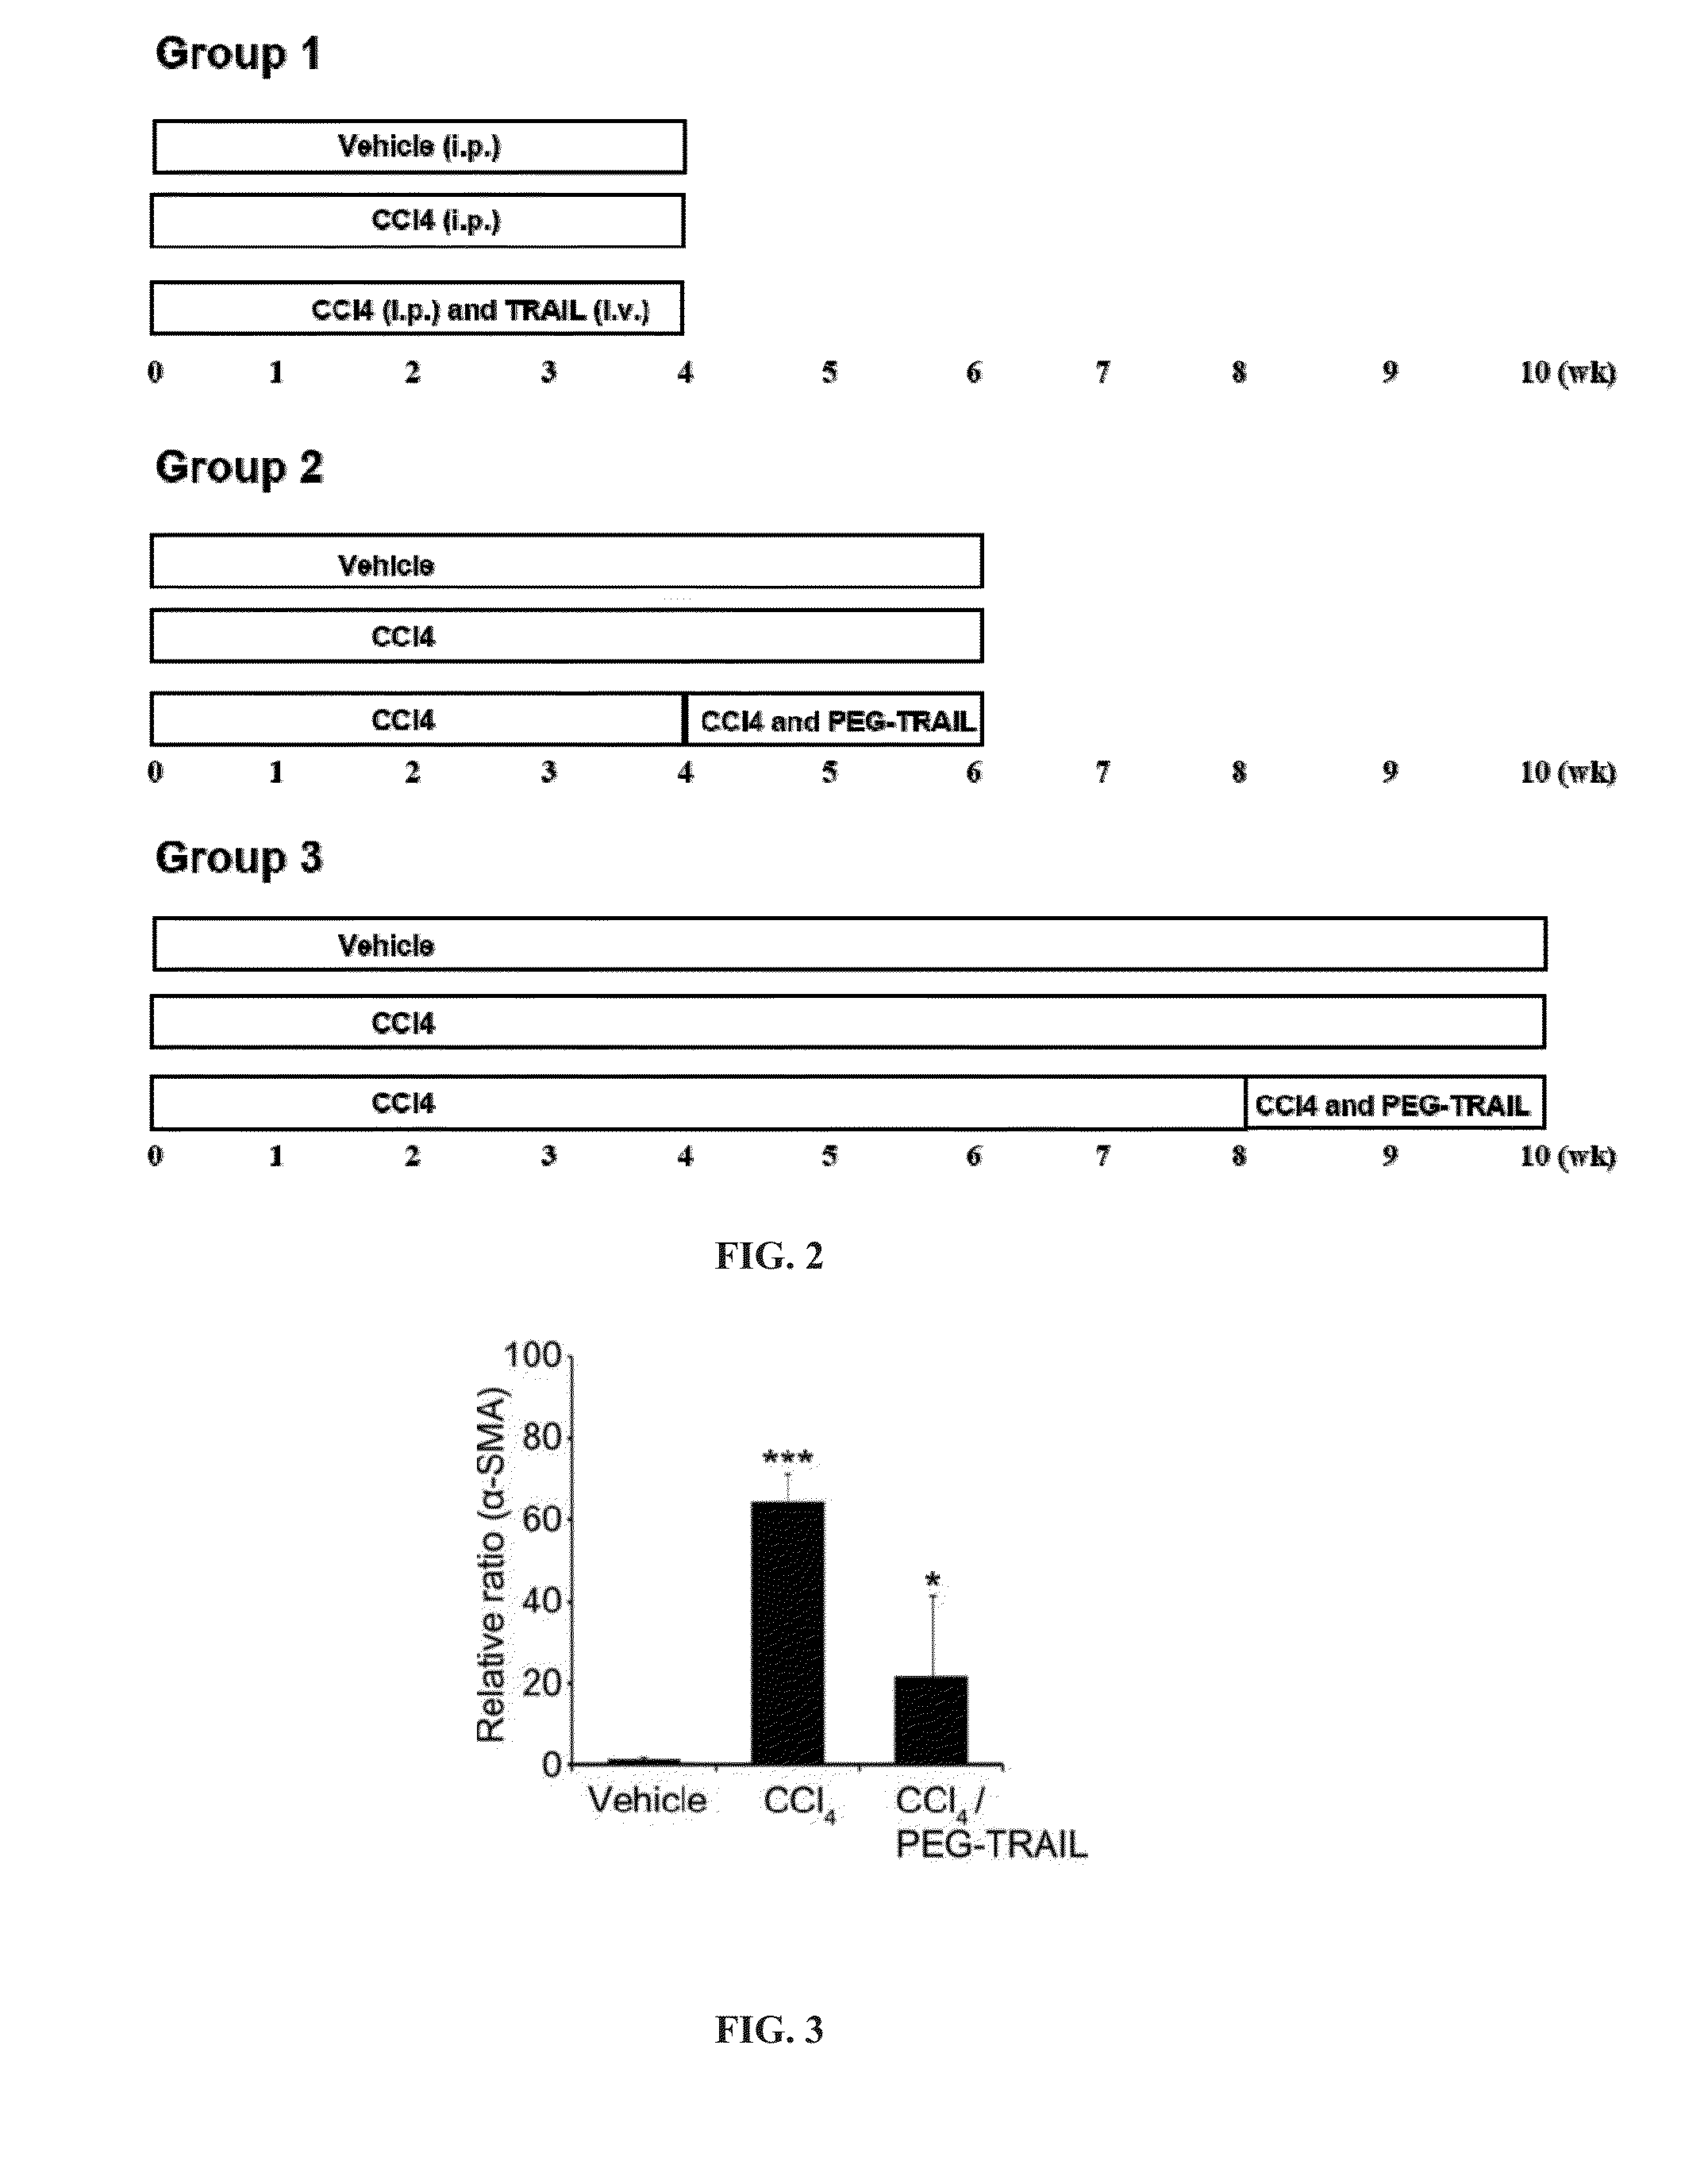 Trail receptor agonists for treatment of fibrotic disease